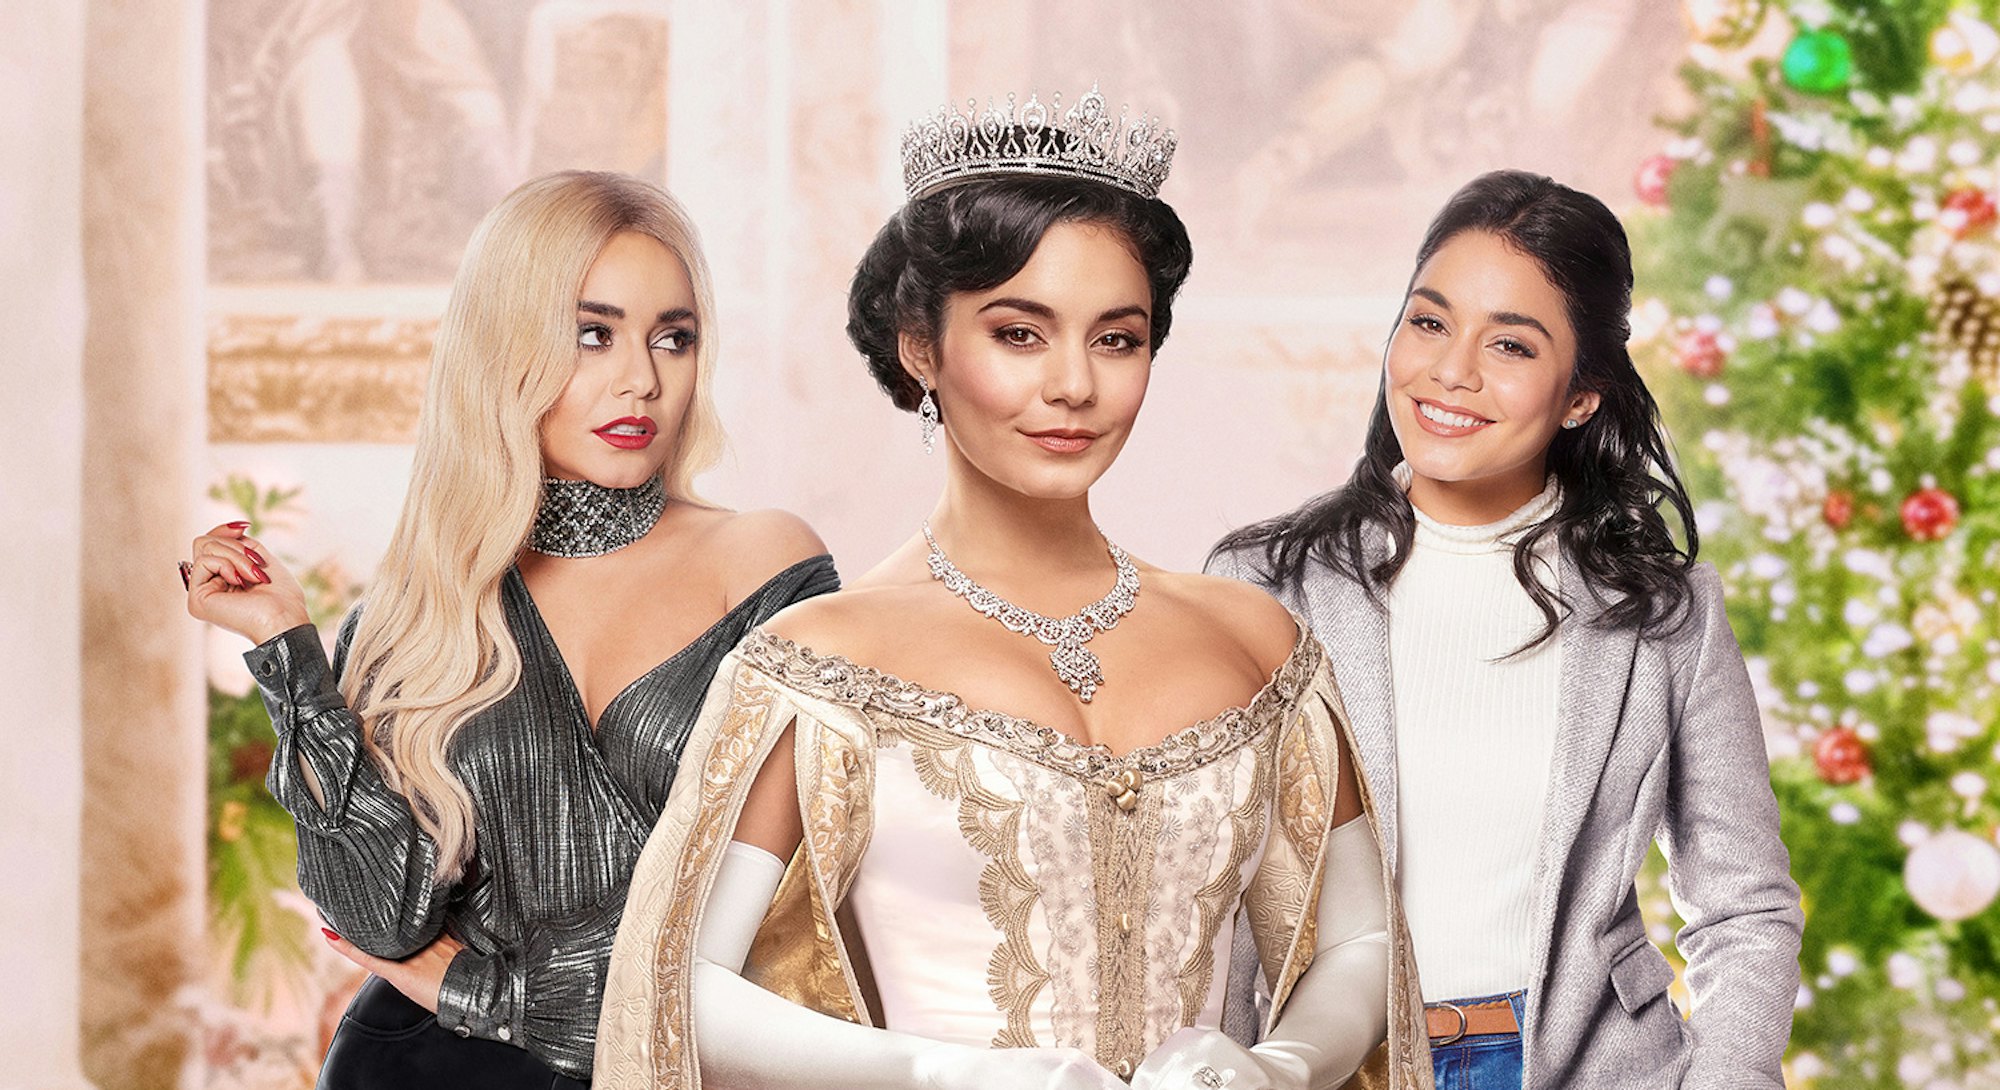 Vanessa Hudgens in 'The Princess Switch: Switched Again' via the Netflix press site.